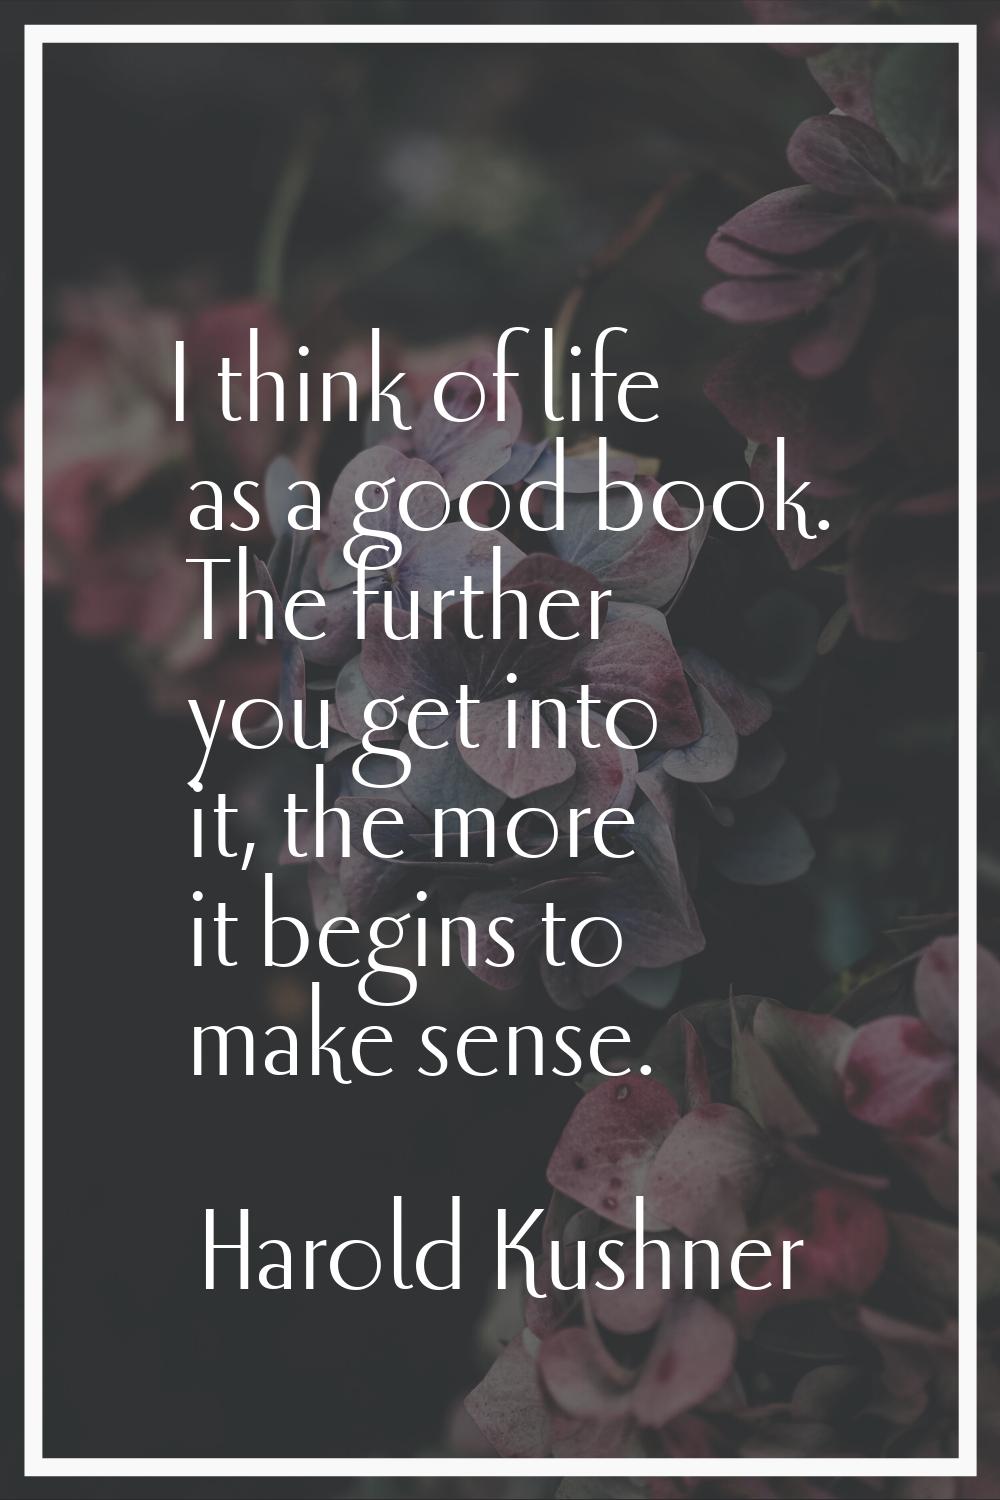 I think of life as a good book. The further you get into it, the more it begins to make sense.